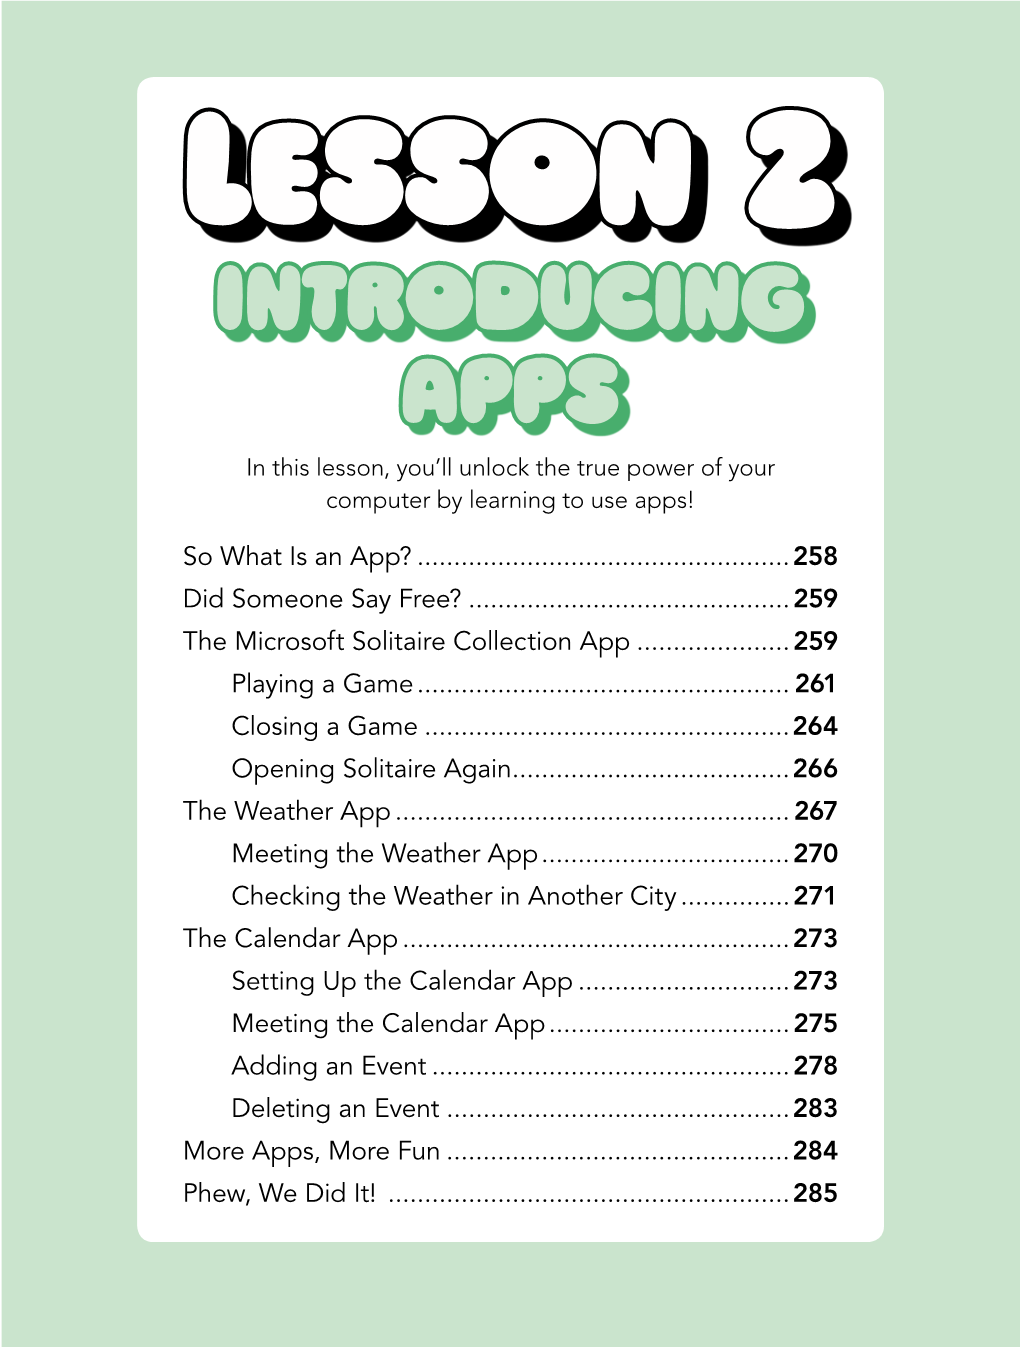 Download Lesson 2: Introducing Apps